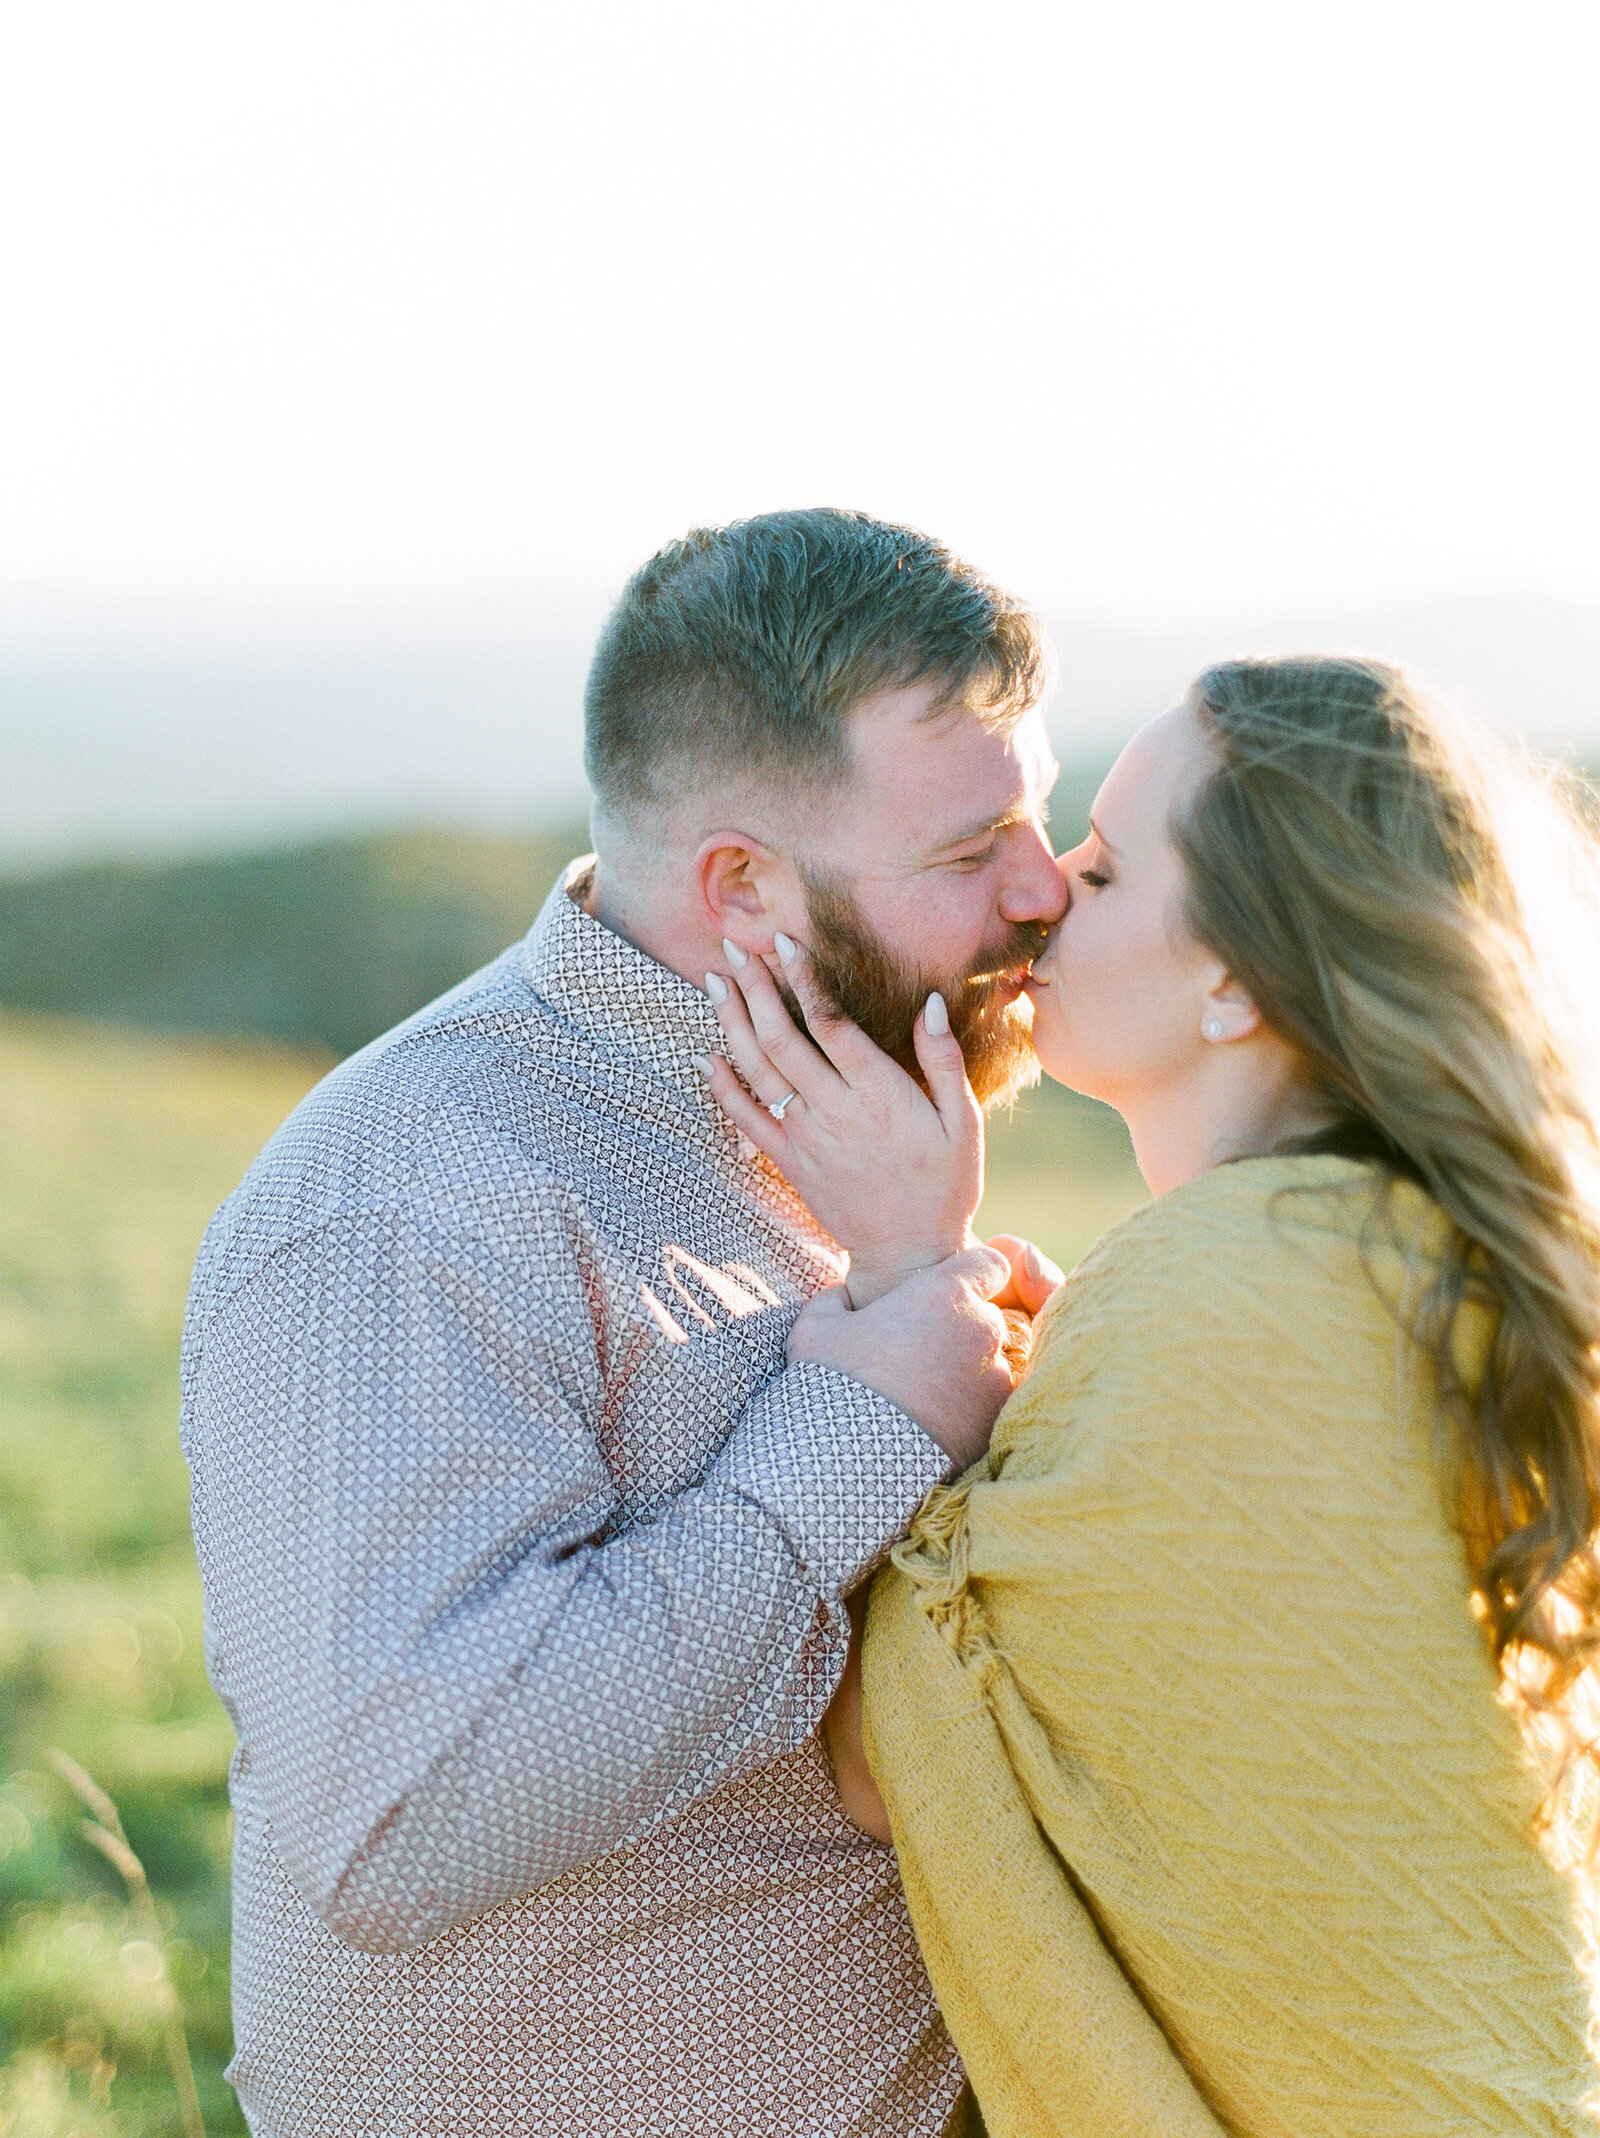 max-patch-engagement-north-carolina-darian-reilly-photography-158